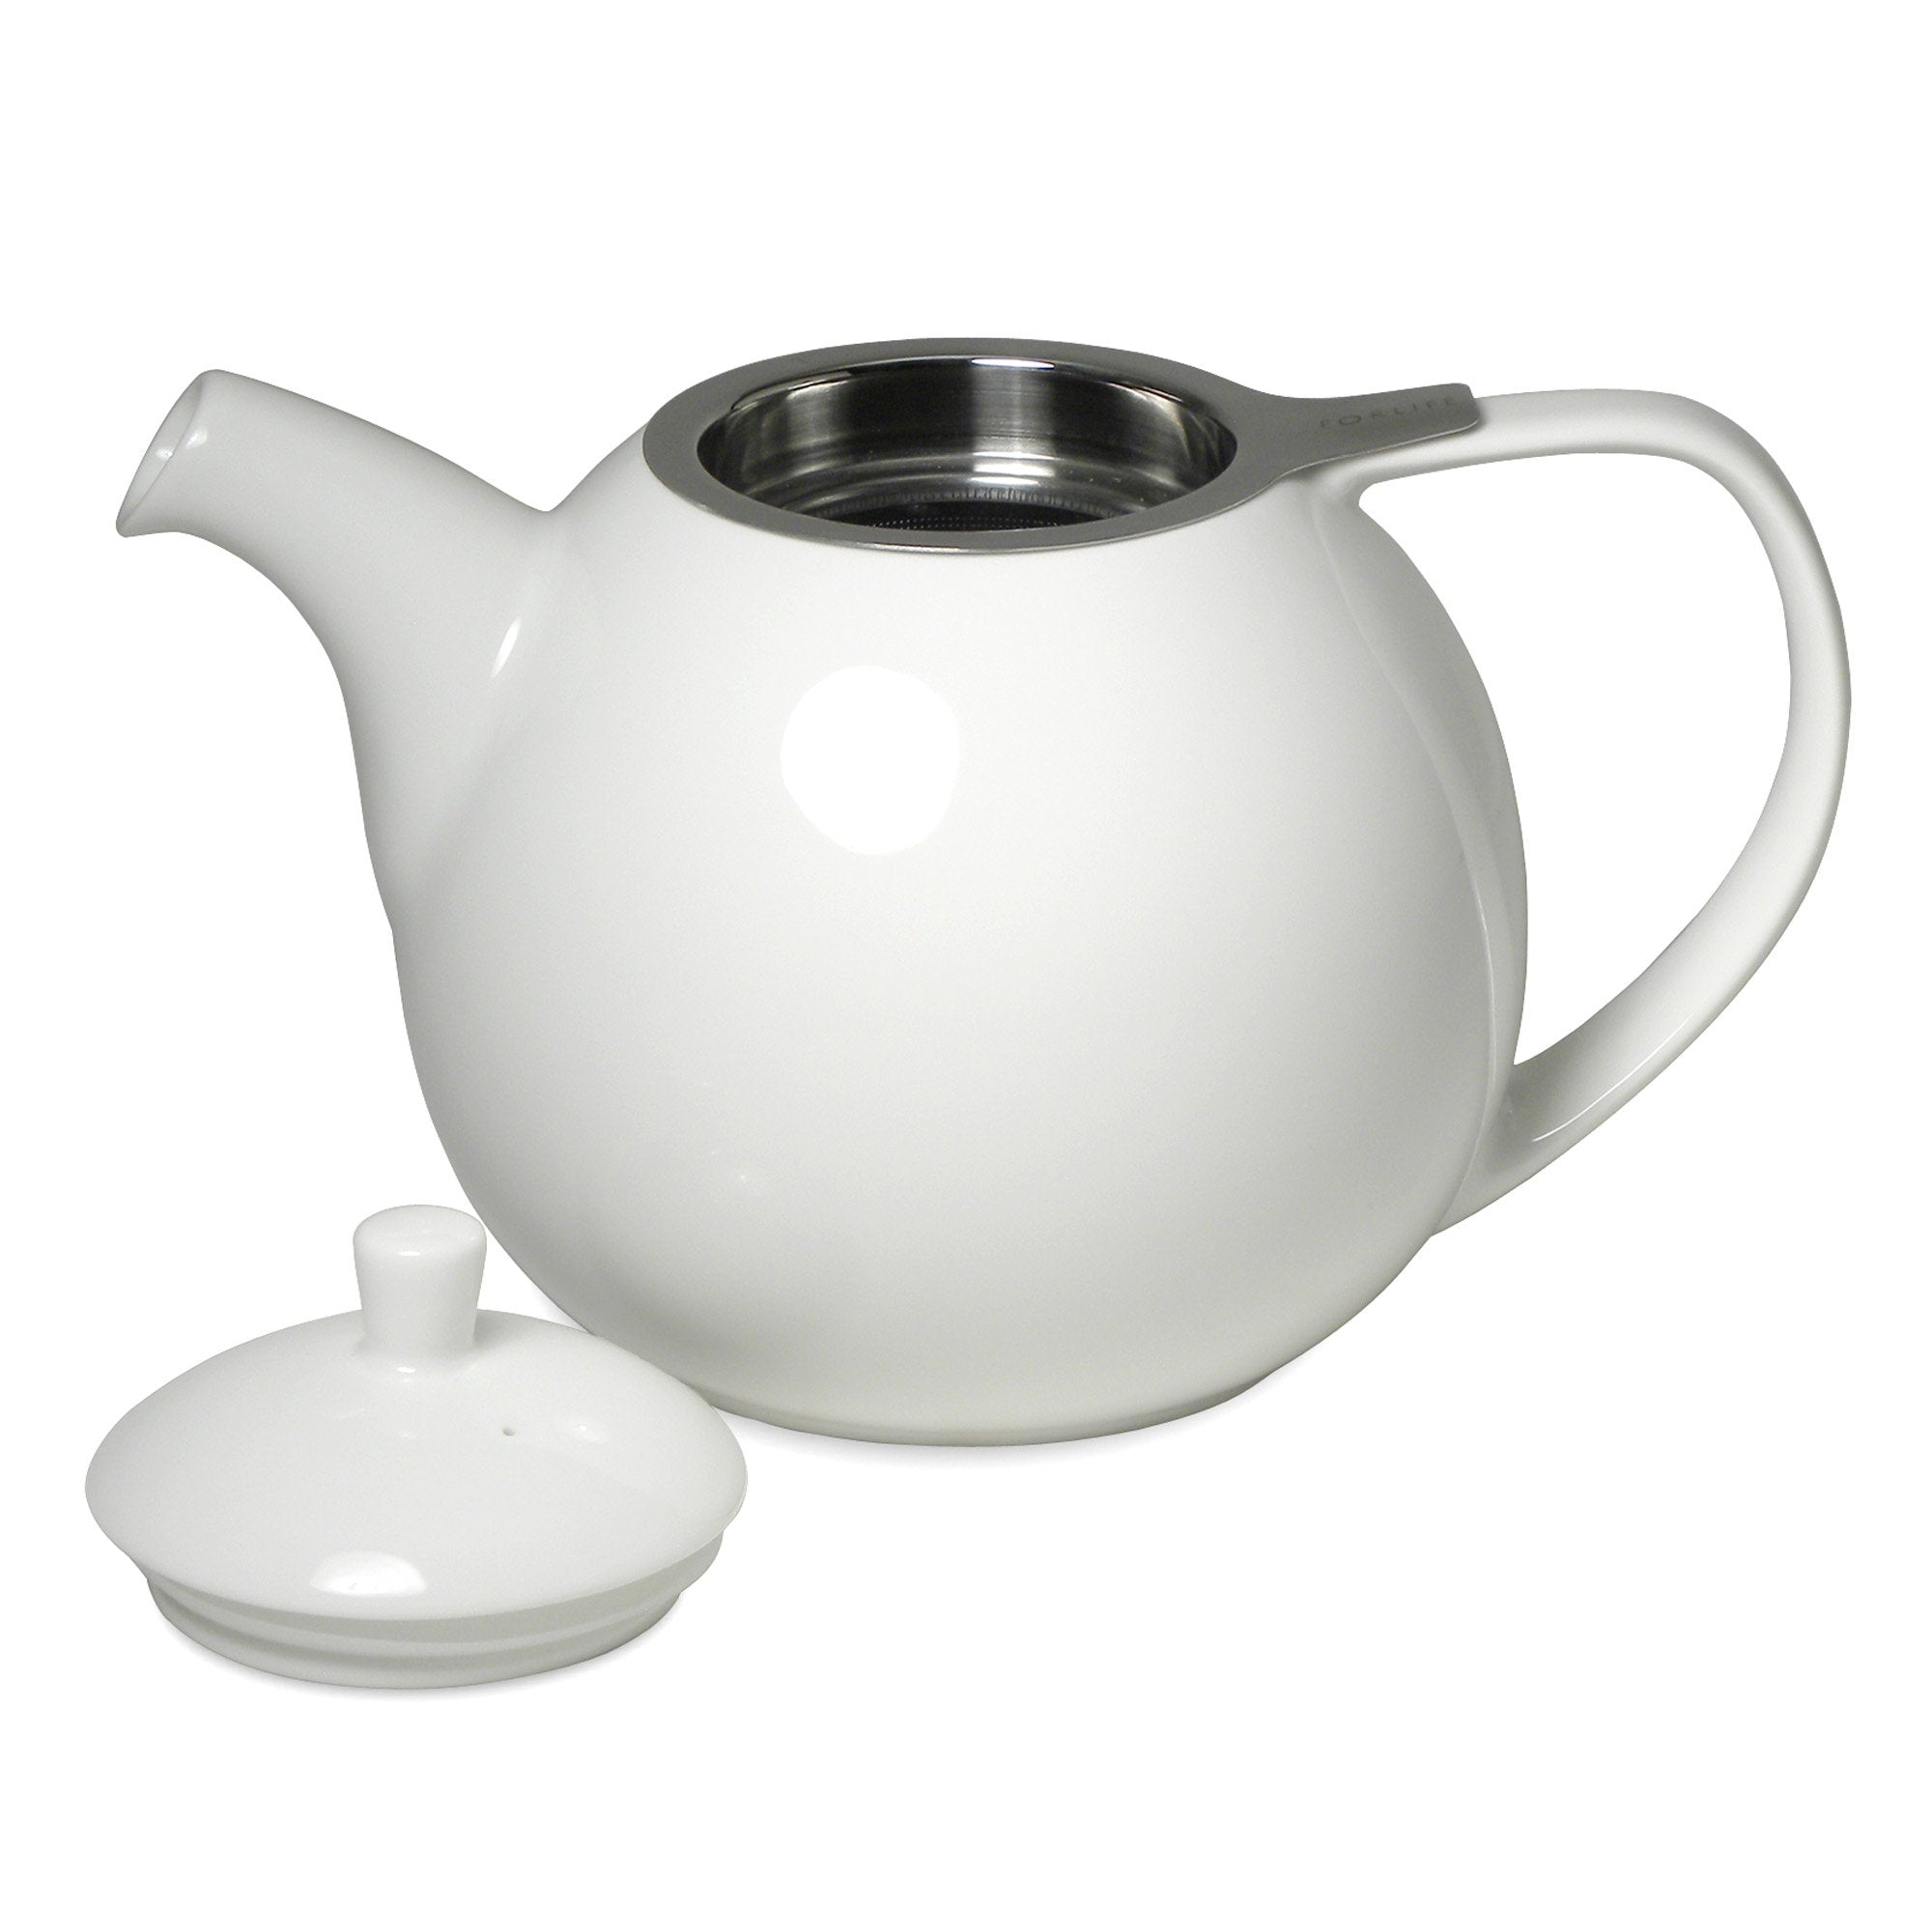 TeaLula 45 oz Curve white Teapot glossy surface with lid off and an extra-fine stainless-steel infuser inside teapot